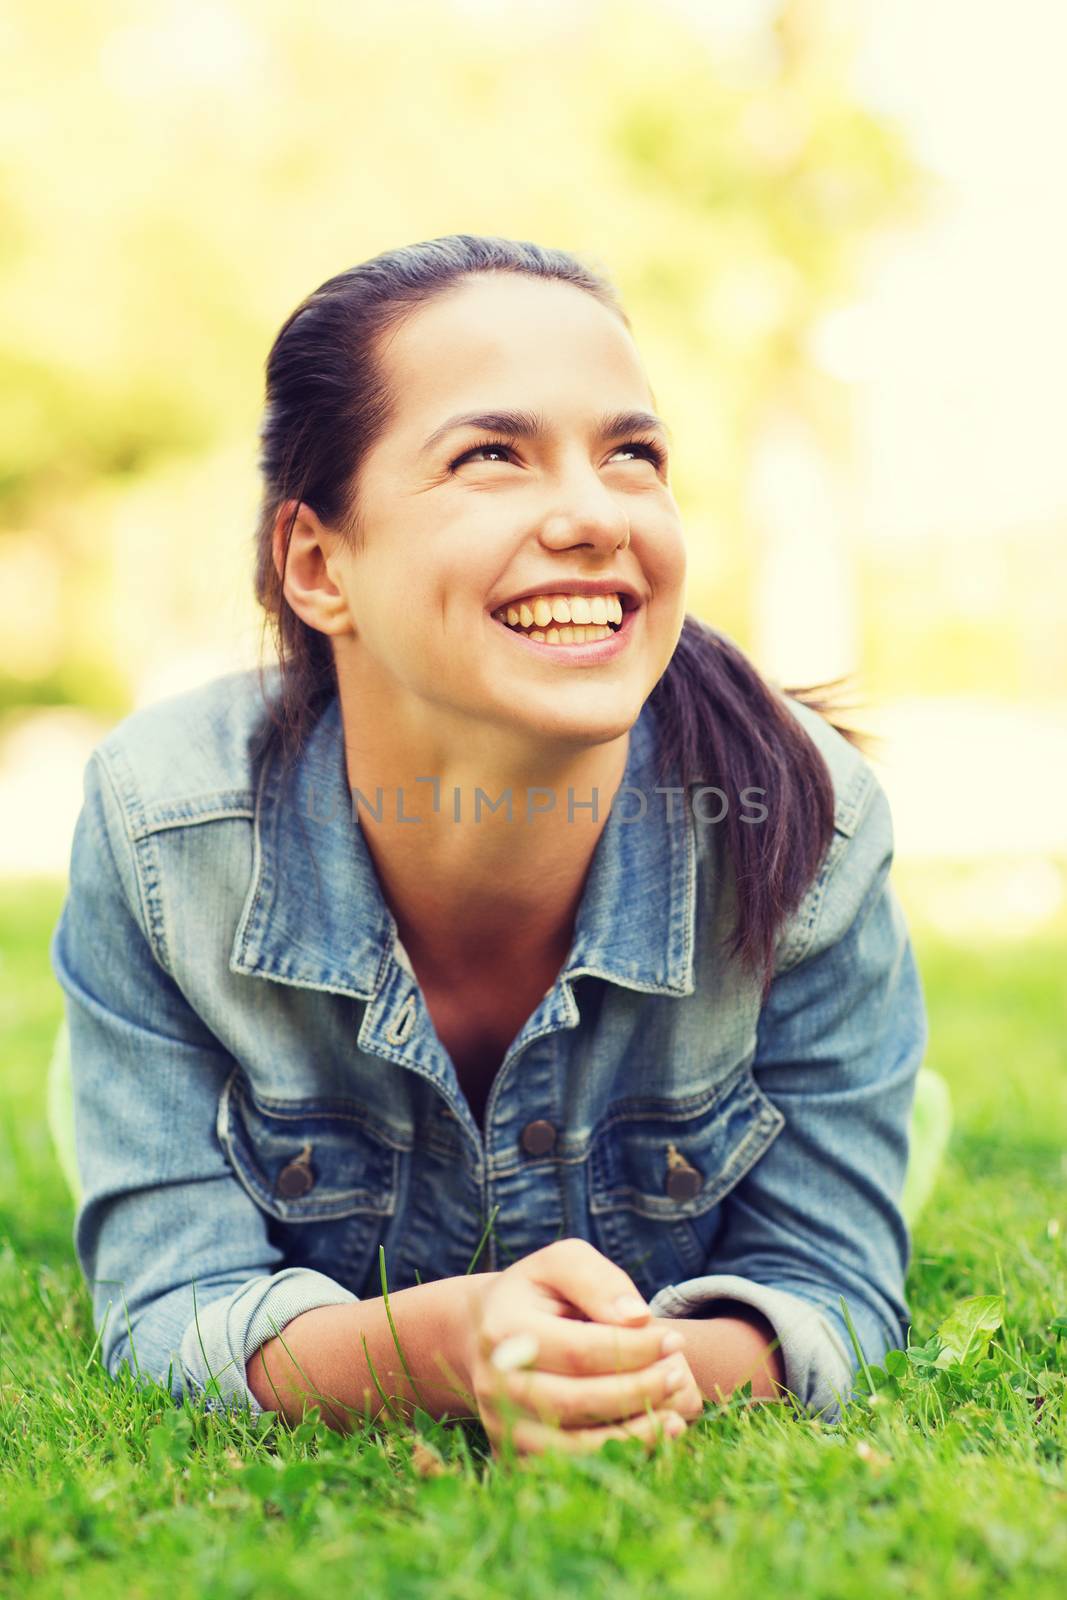 smiling young girl lying on grass by dolgachov